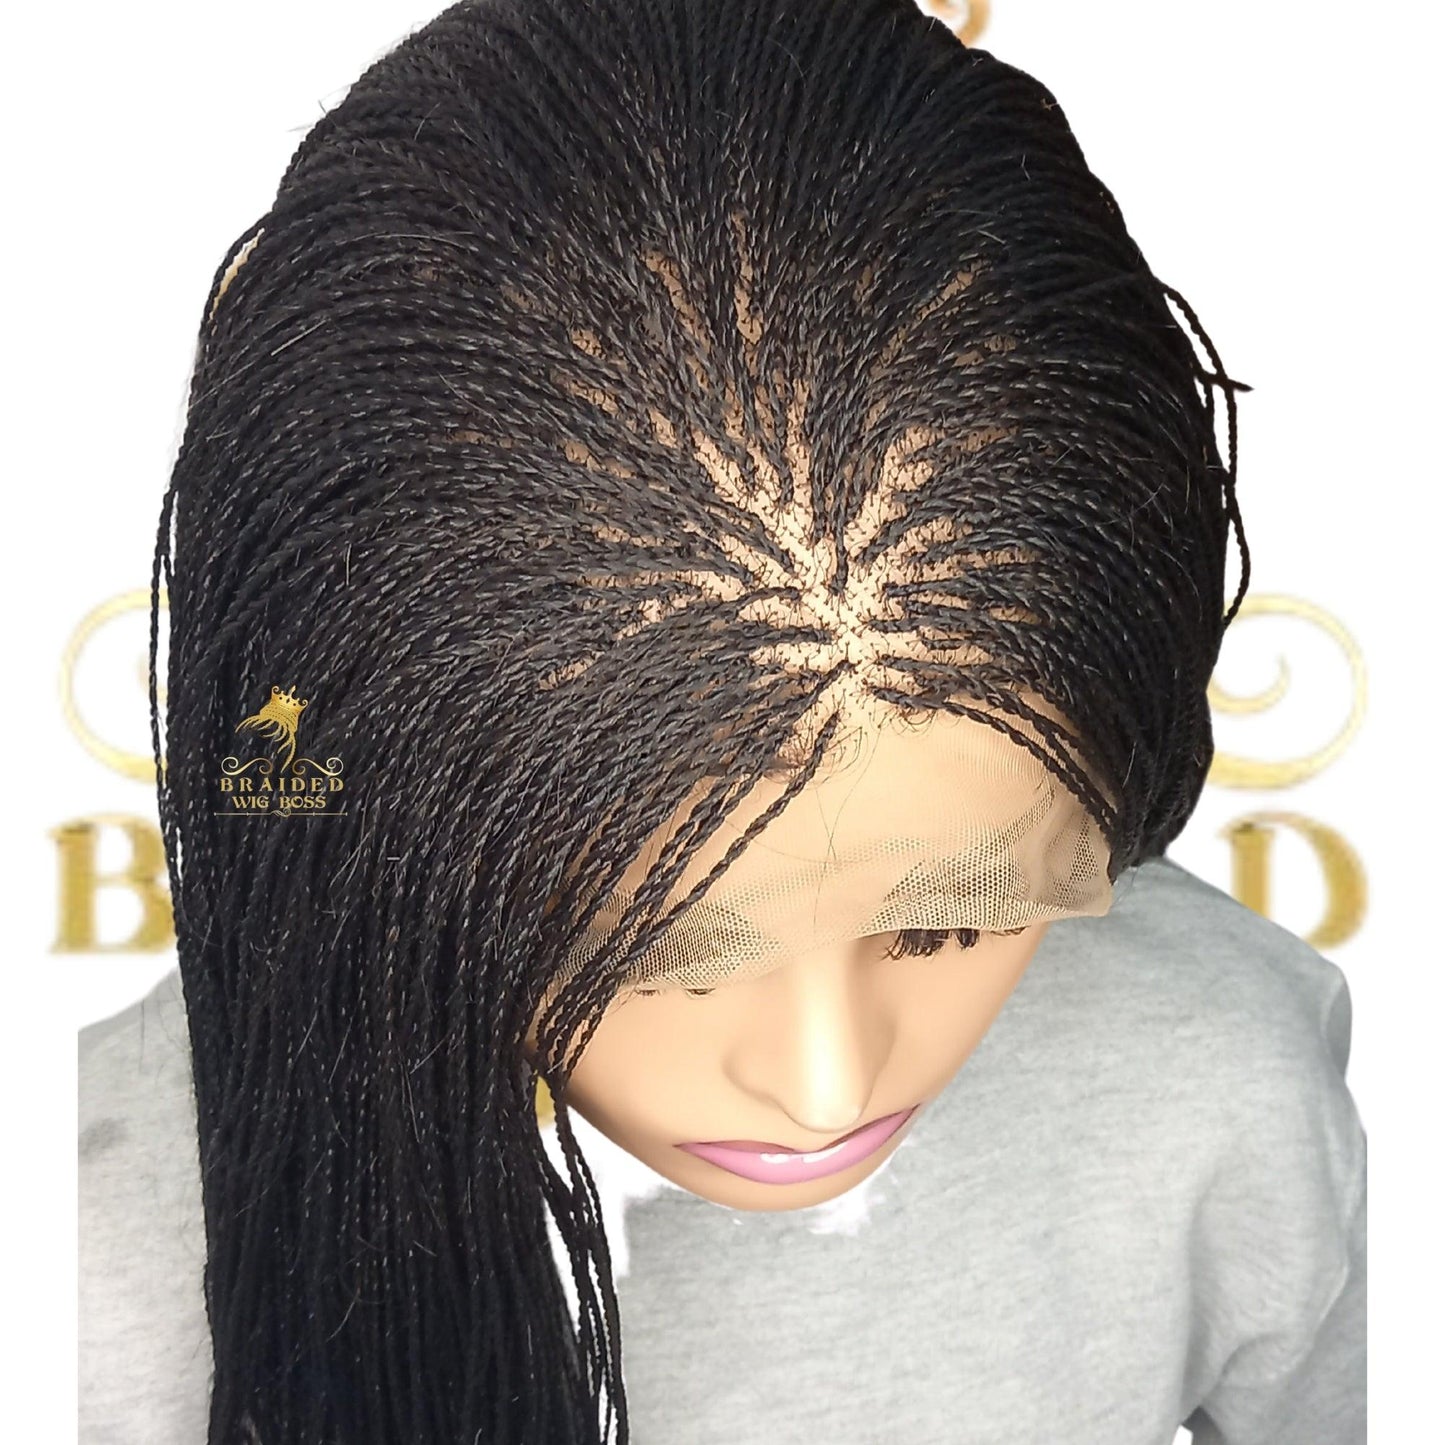 Ombre Micro Million Twist Wig on Full Lace Wig for Black Women 30 Inches, Million Braided Wig with Twist